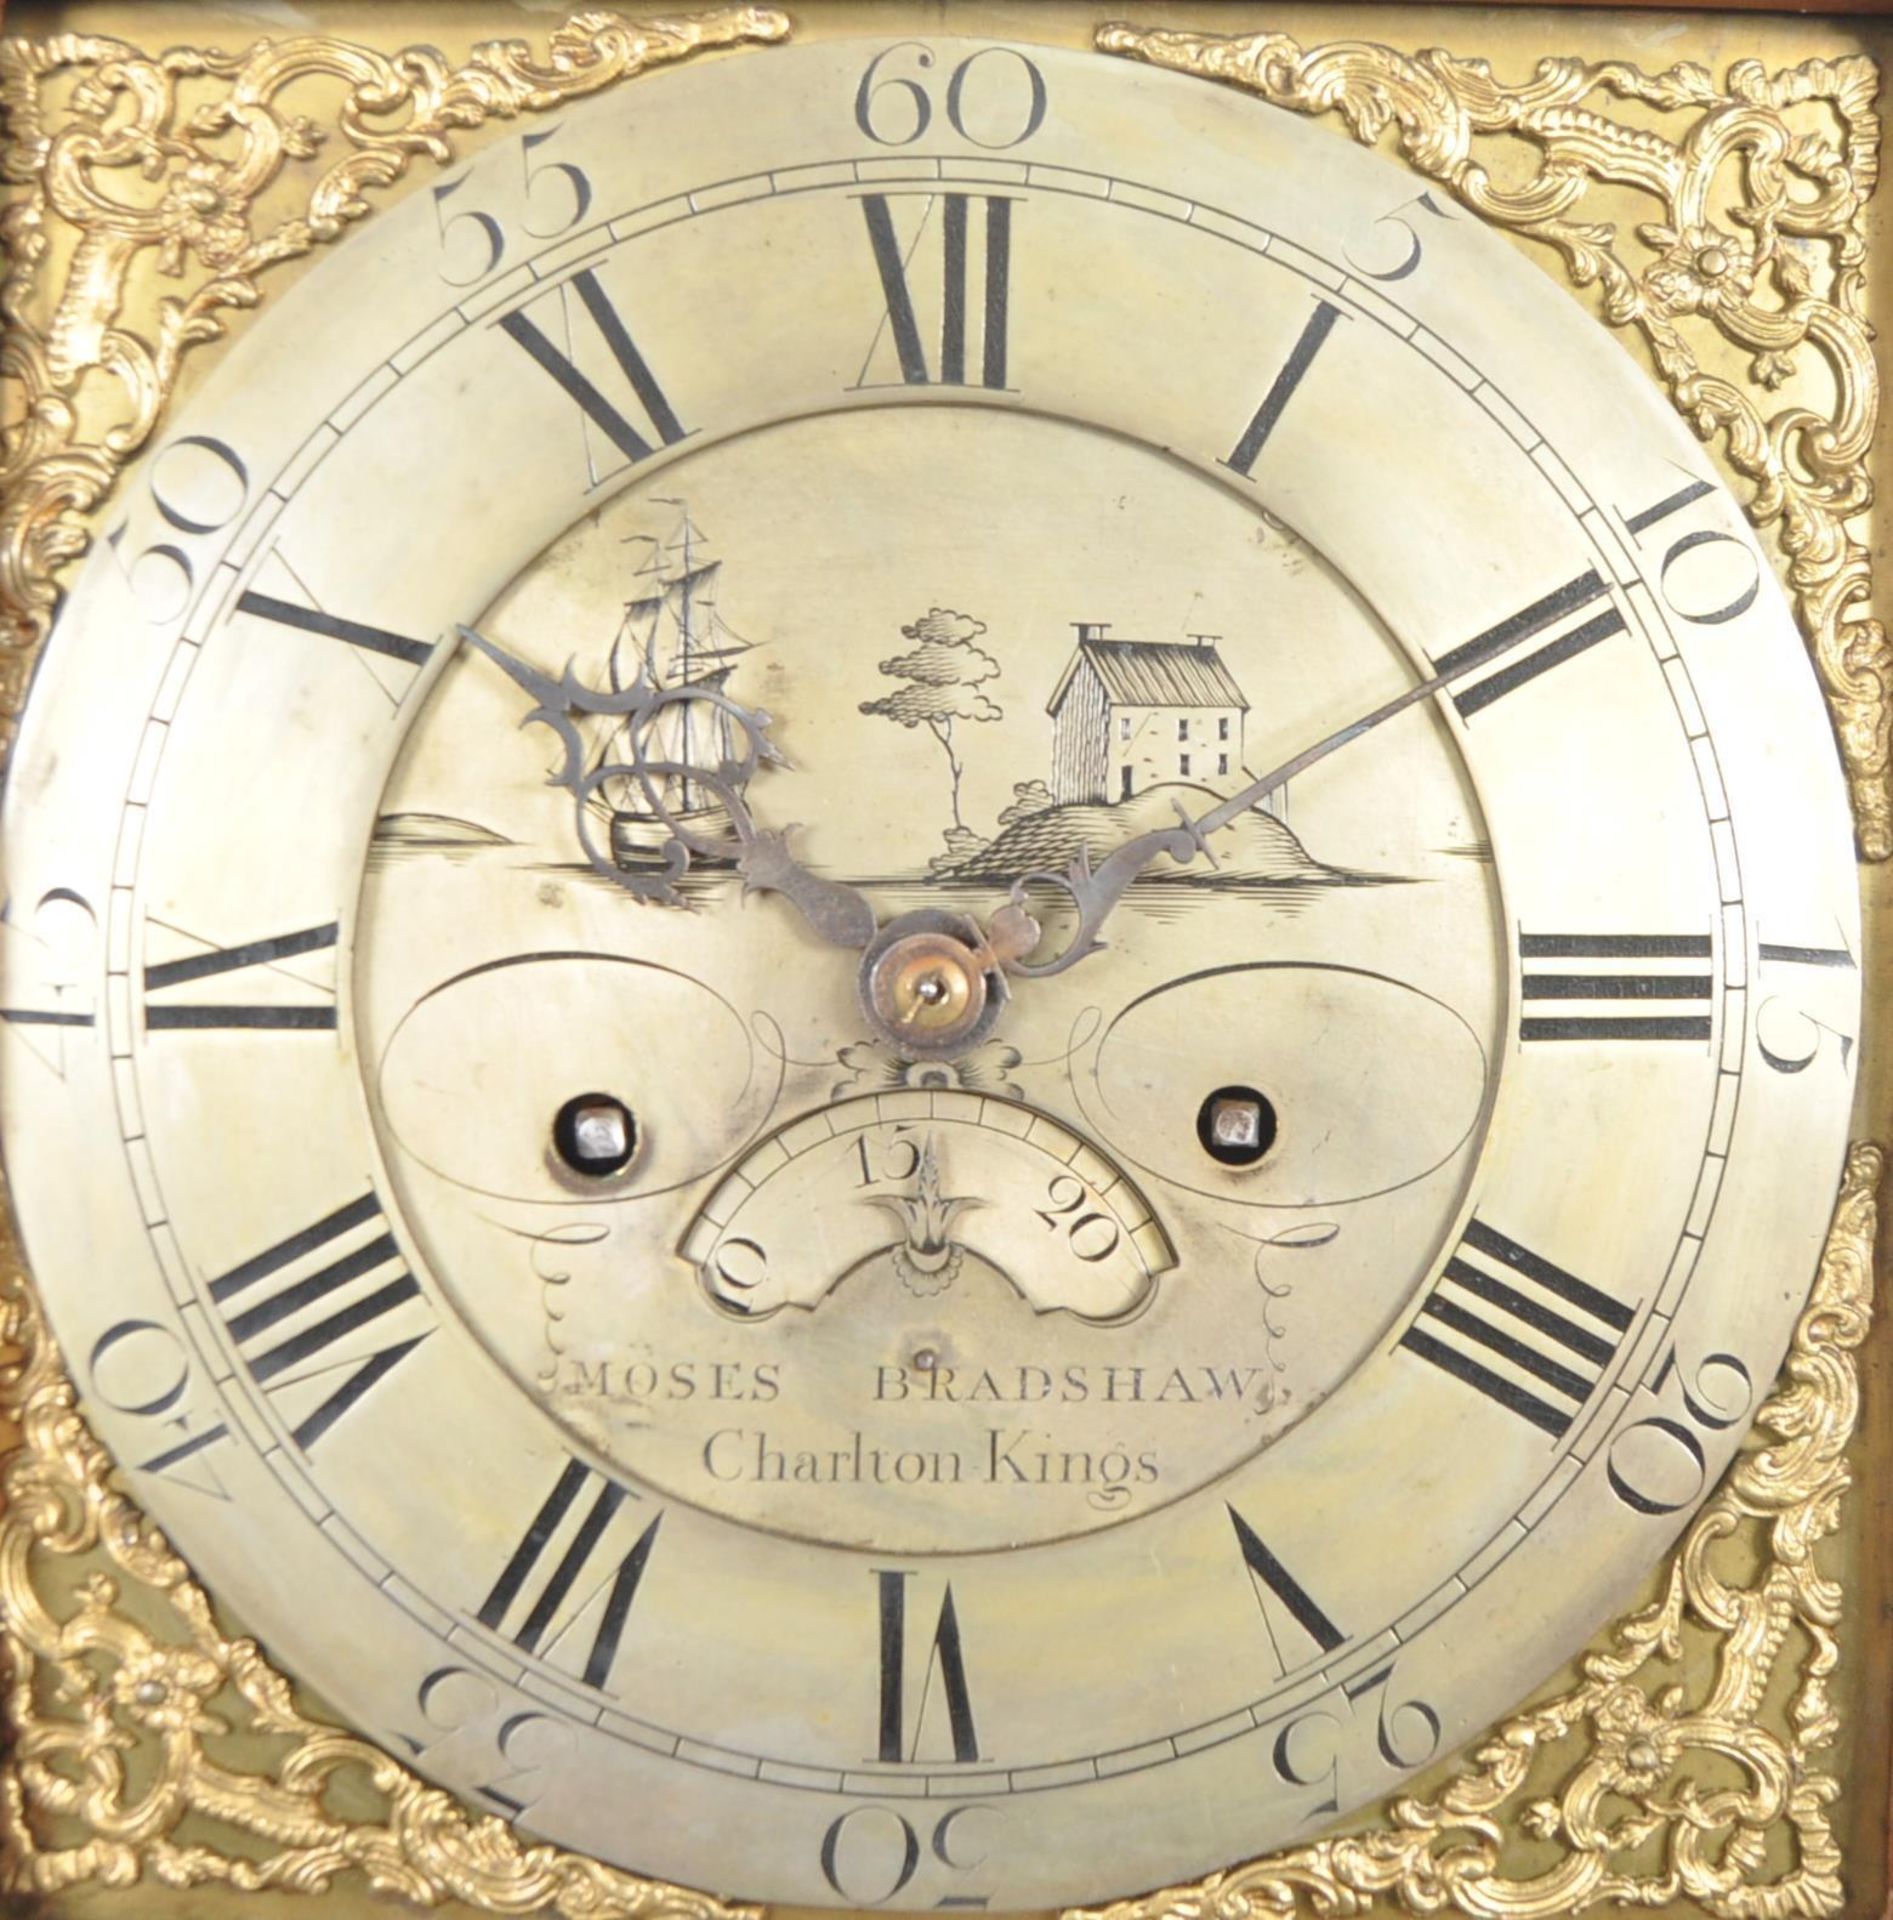 18TH CENTURY WEST COUNTRY MOSES OF BRADSHAW LONGCASE CLOCK - Image 3 of 11